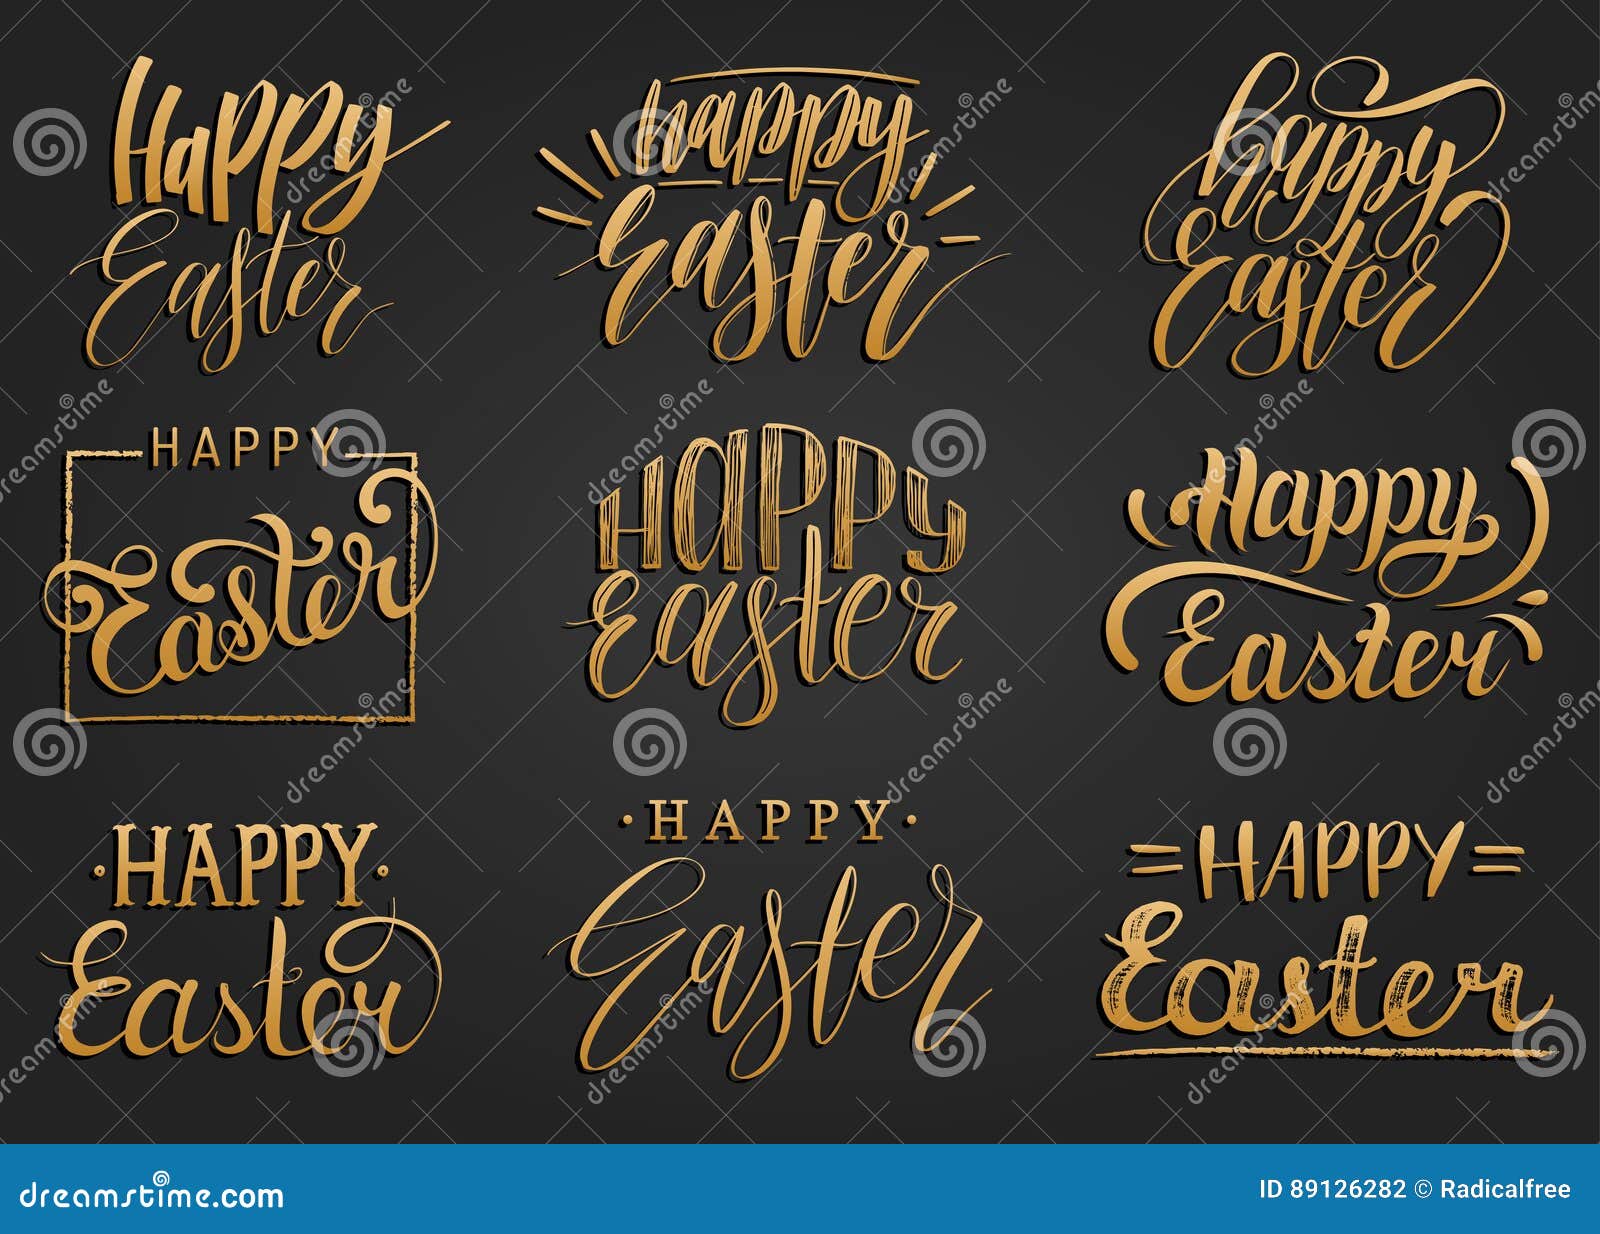 Download Happy Easter Handwritten Lettering Set Religious Calligraphy Collection Black Background For Greeting Cards